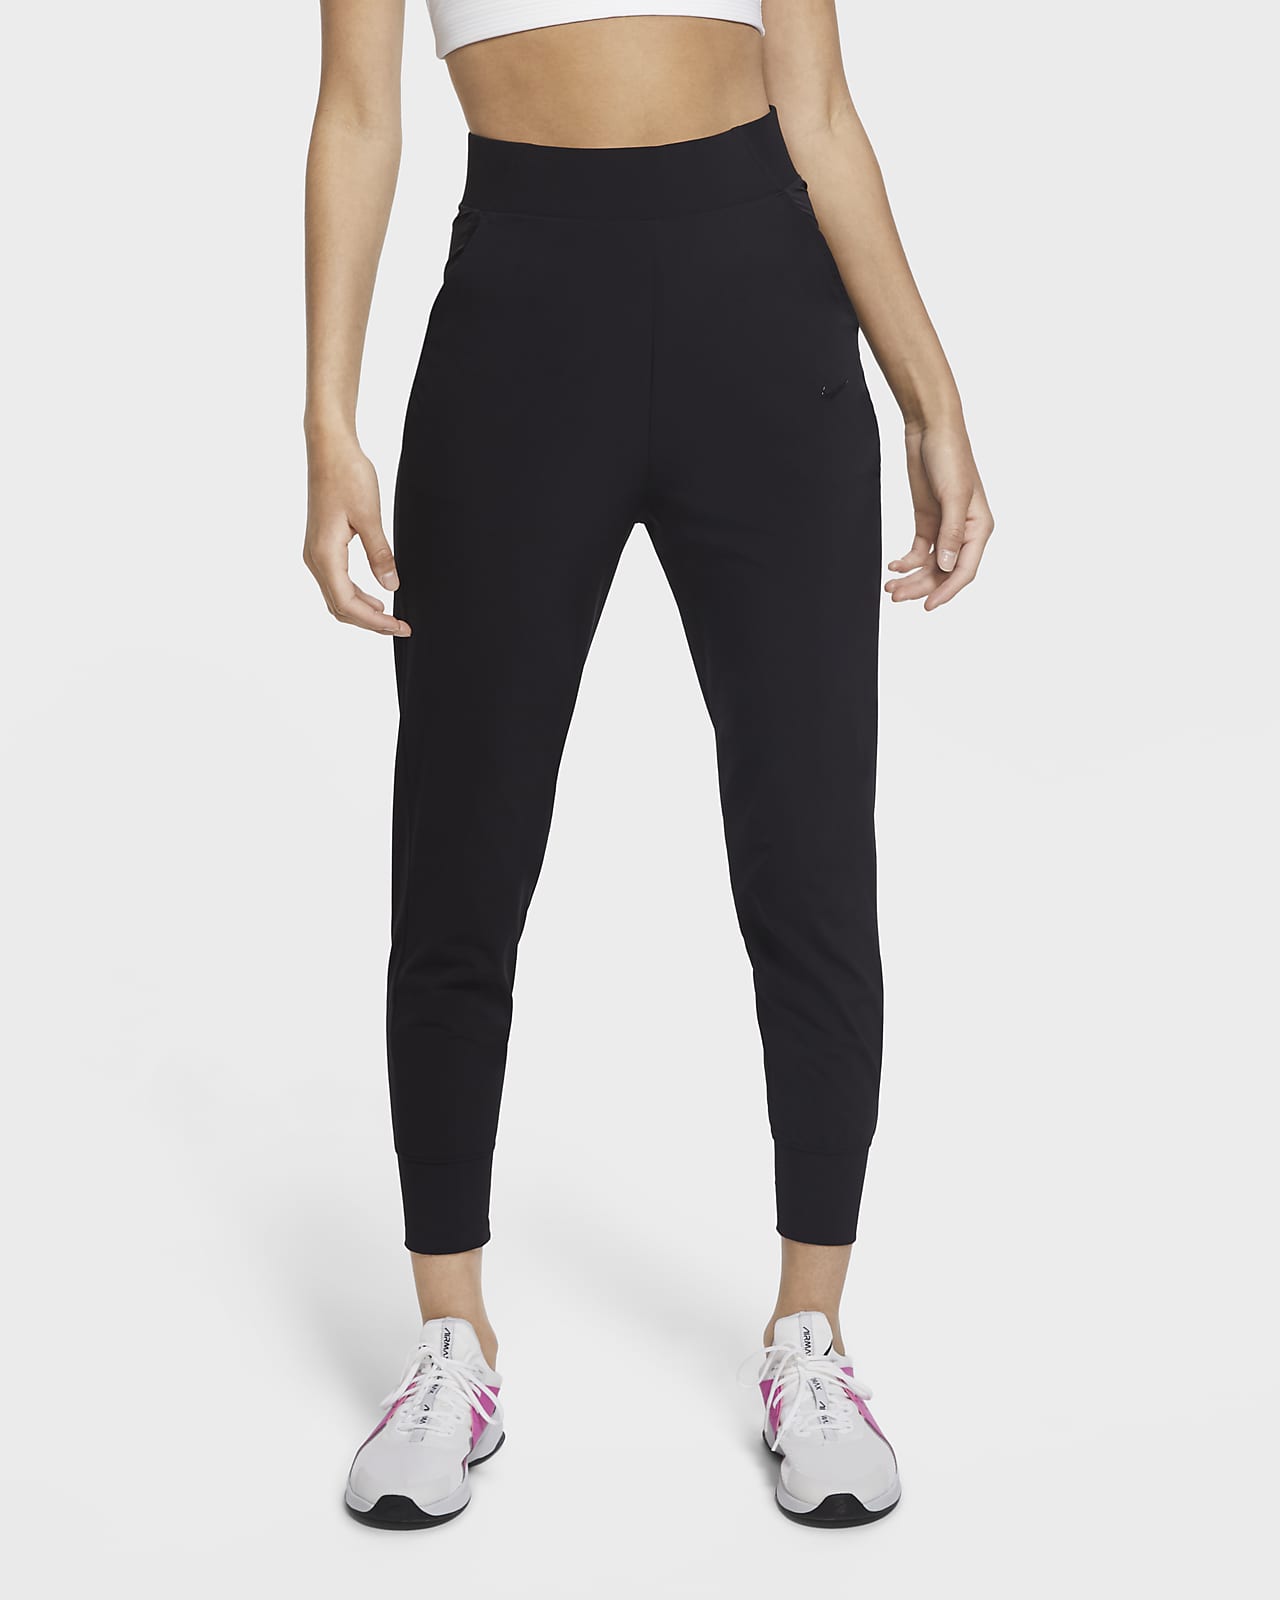 Distract adjacent Back, back, back (part Nike Bliss Luxe Women's Training Trousers. Nike SA